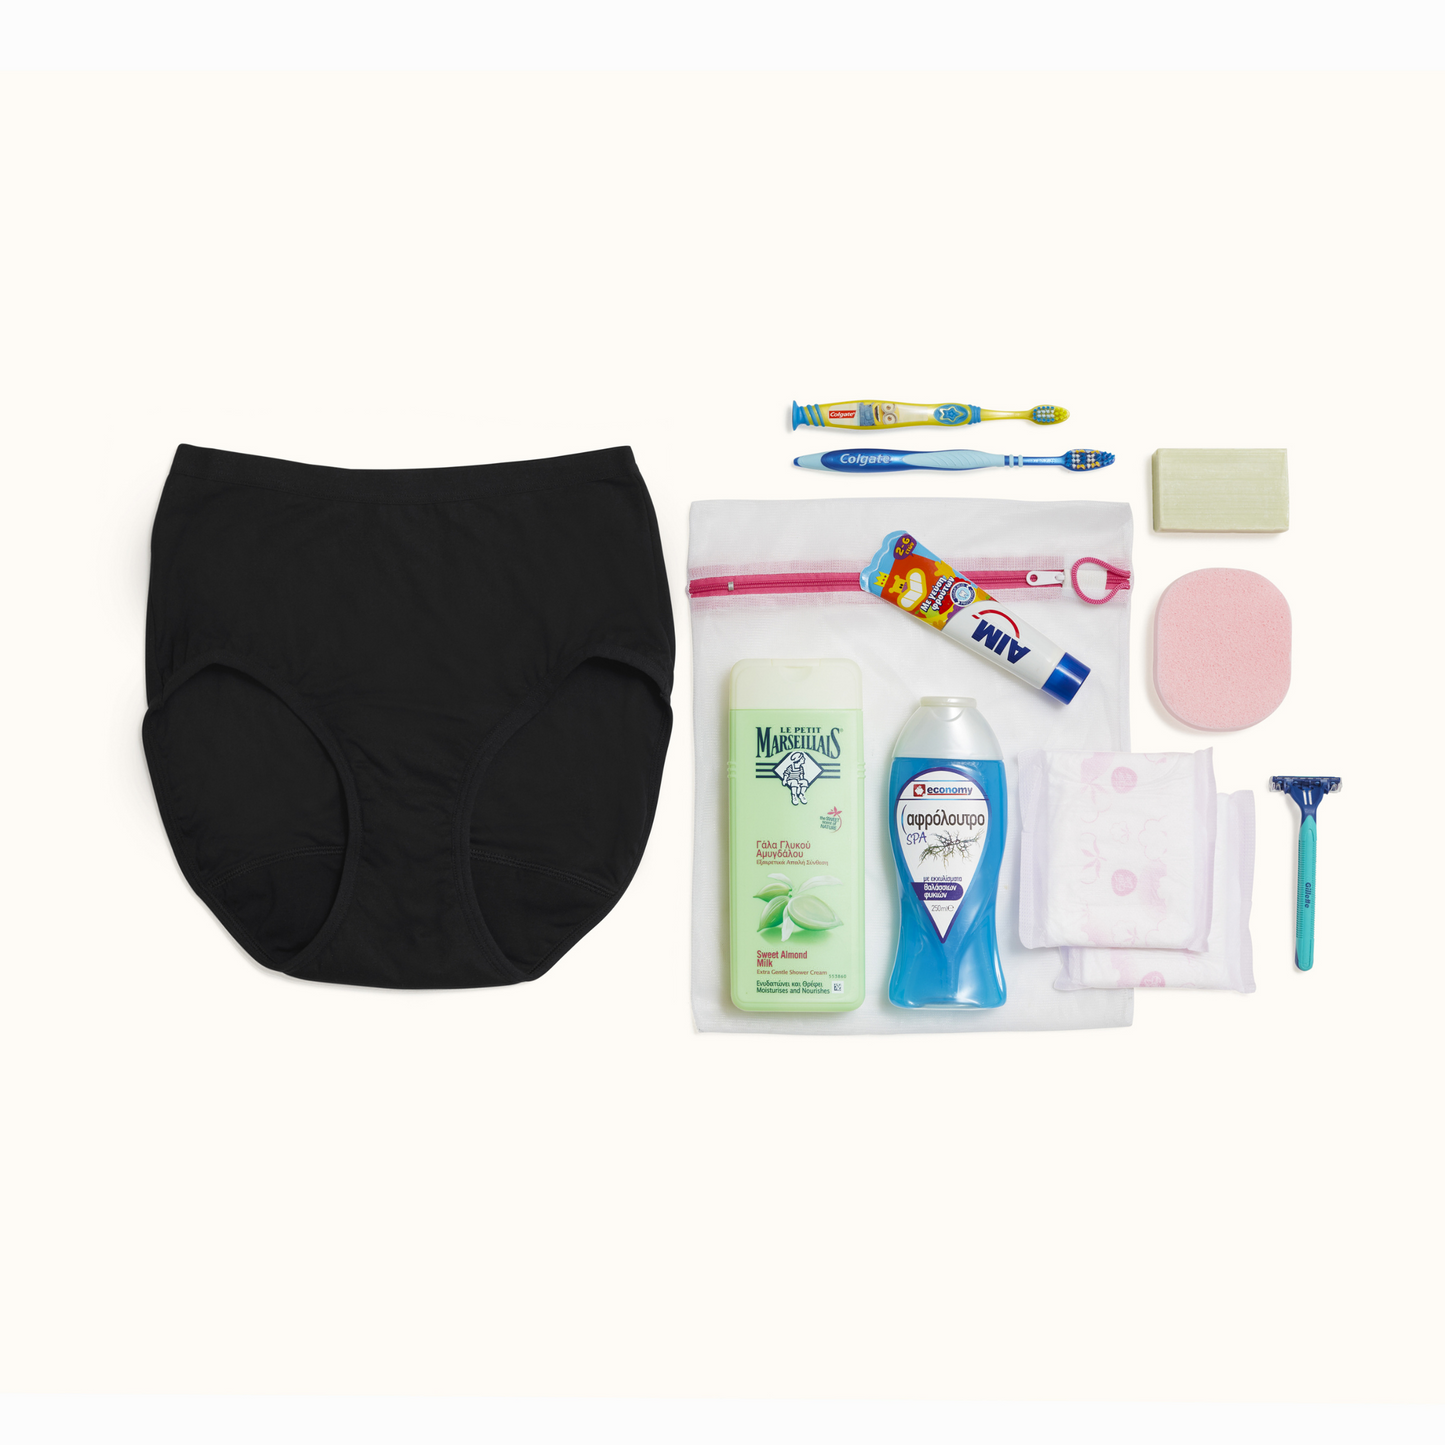 A pair of menstrual pants, 2 toothbrushes, toothpaste, shower gel, shampoo, menstrual pads, a razor, soap bar.